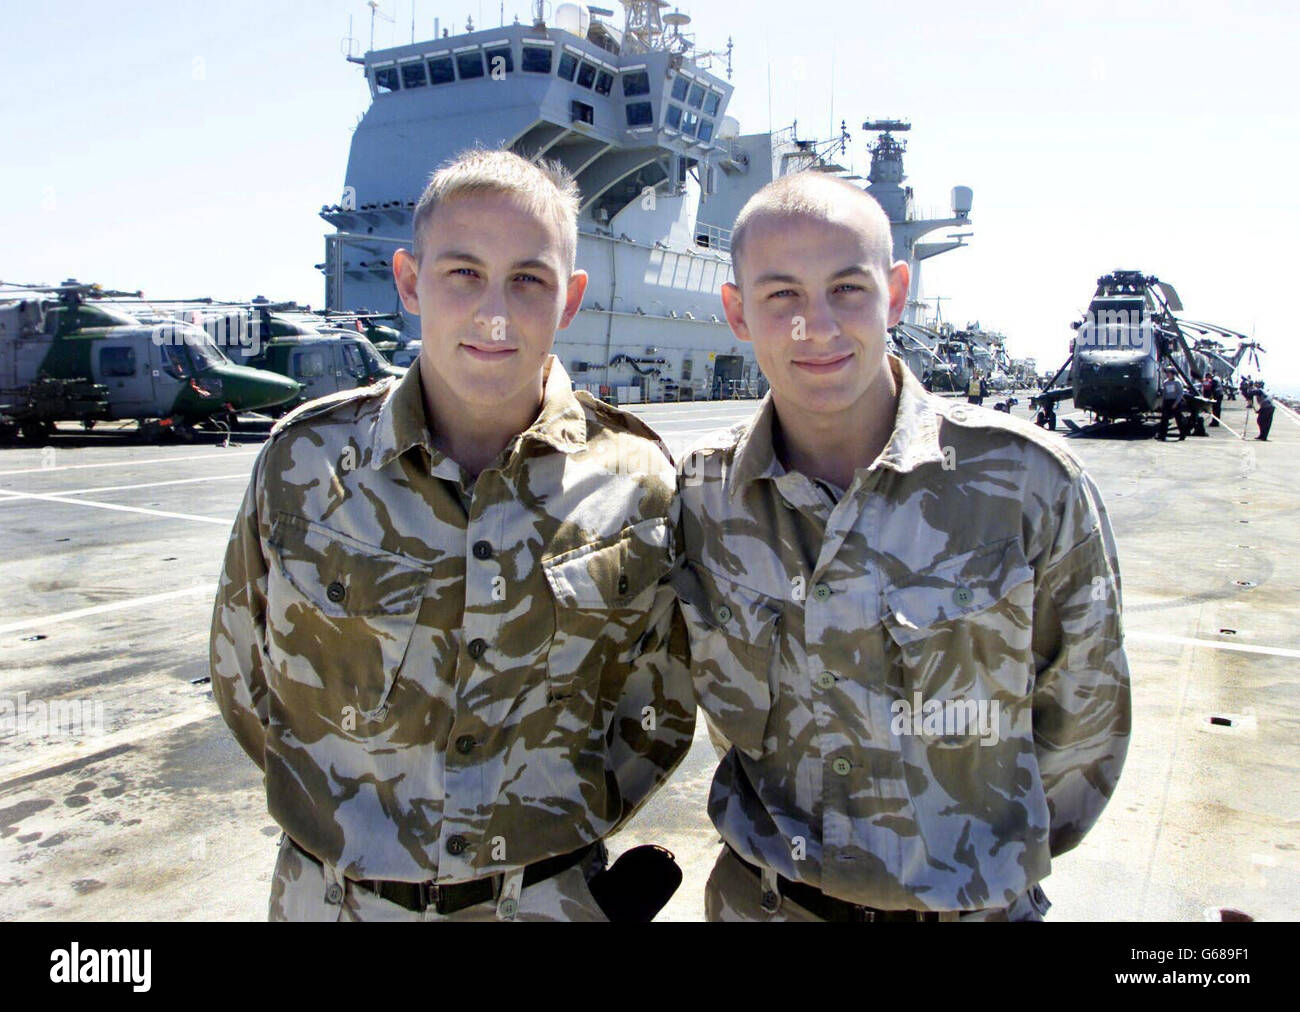 Identical twins Paul (left) and Steven Holland on board HMS Ocean in the Northern Arabian Gulf. By a stroke of chance, the sailor brothers have been stationed with exactly the same individual unit on exactly the same ship for any conflict against Iraq. * Also holding the same job and rank, the twins, from St Helens in Lancashire, both work as Air Engineer Mechanics on navy Sea King helicopters with 845 Naval Air Squadron, currently based on board the helicopter carrier. Stock Photo